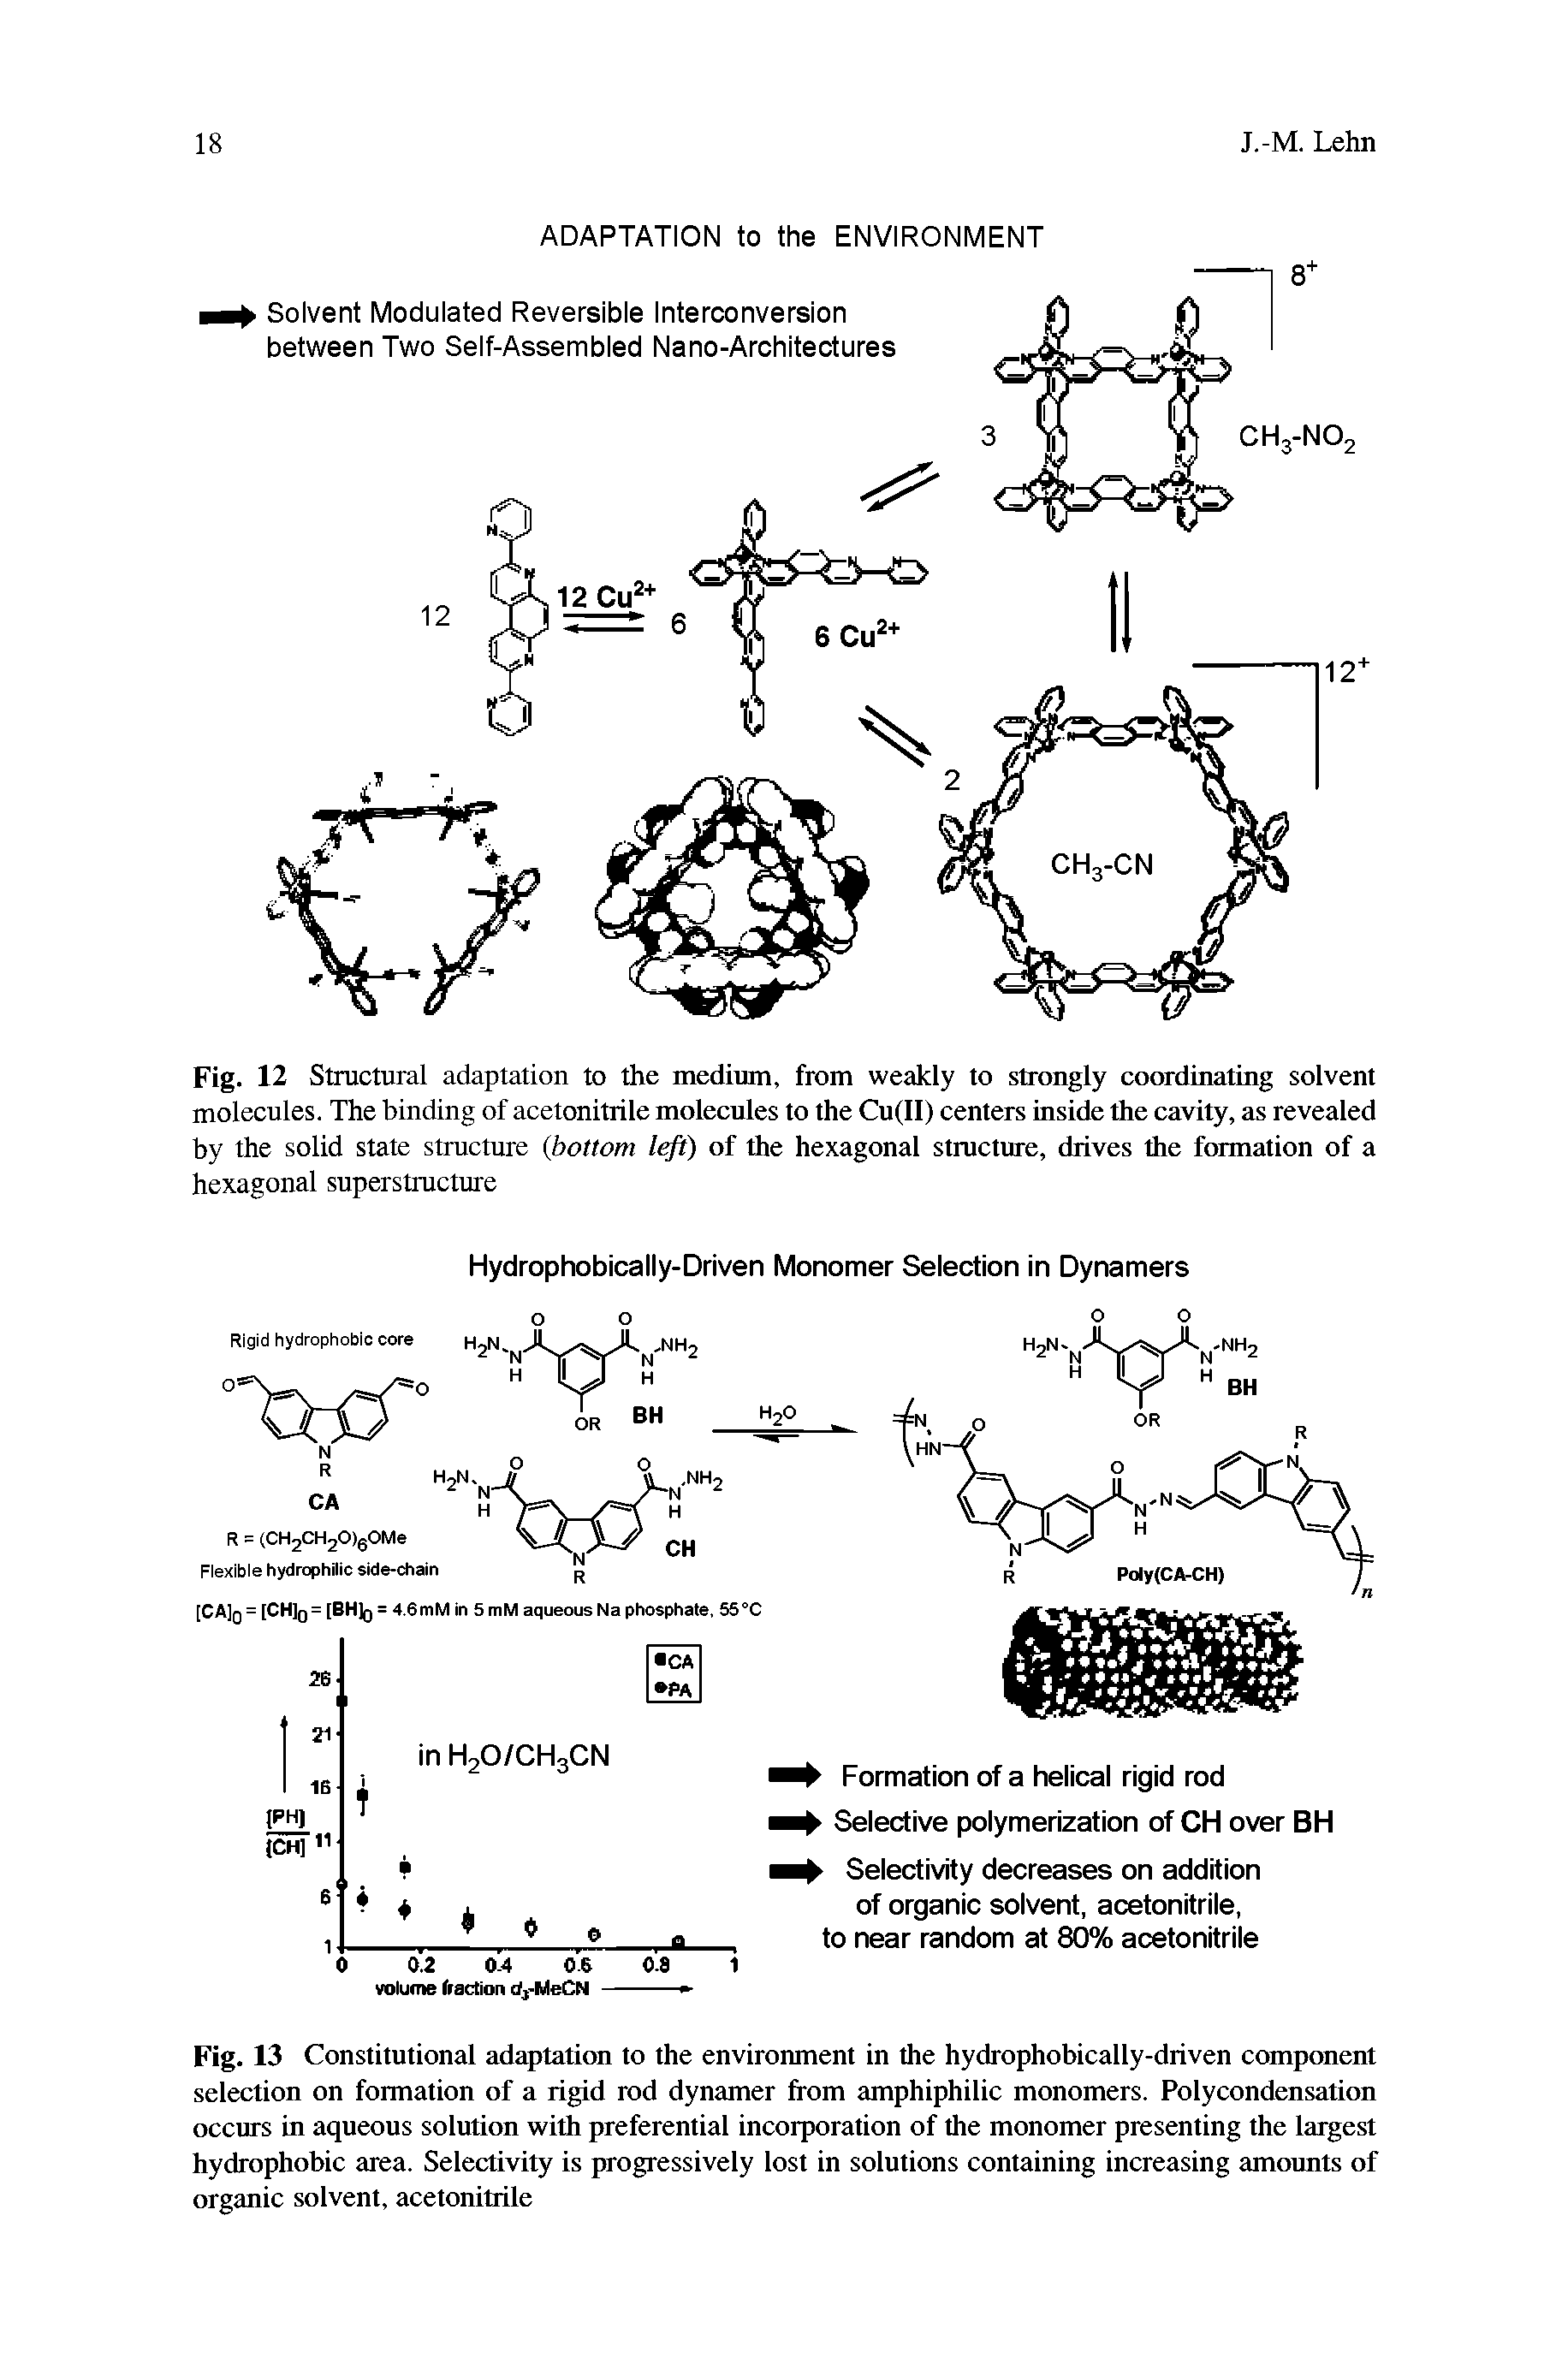 Fig. 13 Constitutional adaptation to the environment in the hydrophobically-driven component selection on formation of a rigid rod dynamer from amphiphilic monomers. Polycondensation occurs in aqueous solution with preferential incorporation of the monomer presenting the largest hydrophobic area. Selectivity is progressively lost in solutions containing increasing amounts of organic solvent, acetonitrile...